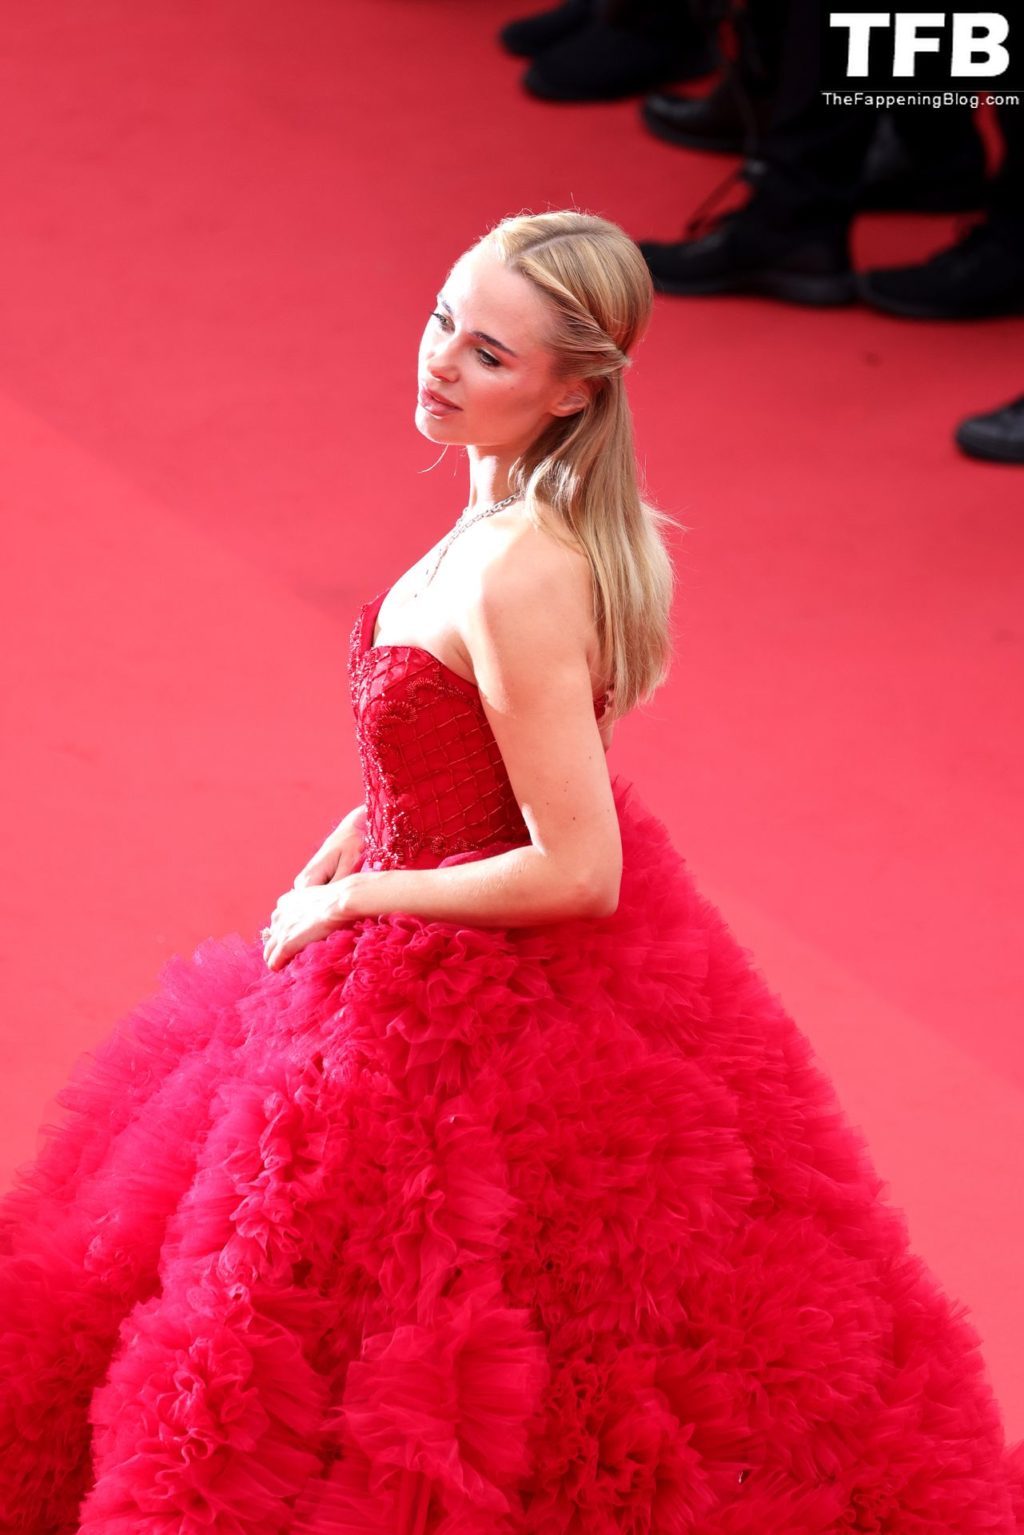 Kimberley Garner Sexy The Fappening Blog 26 1 1024x1535 - Kimberley Garner Looks Hot in a Red Dress at the 75th Annual Cannes Film Festival (134 Photos)